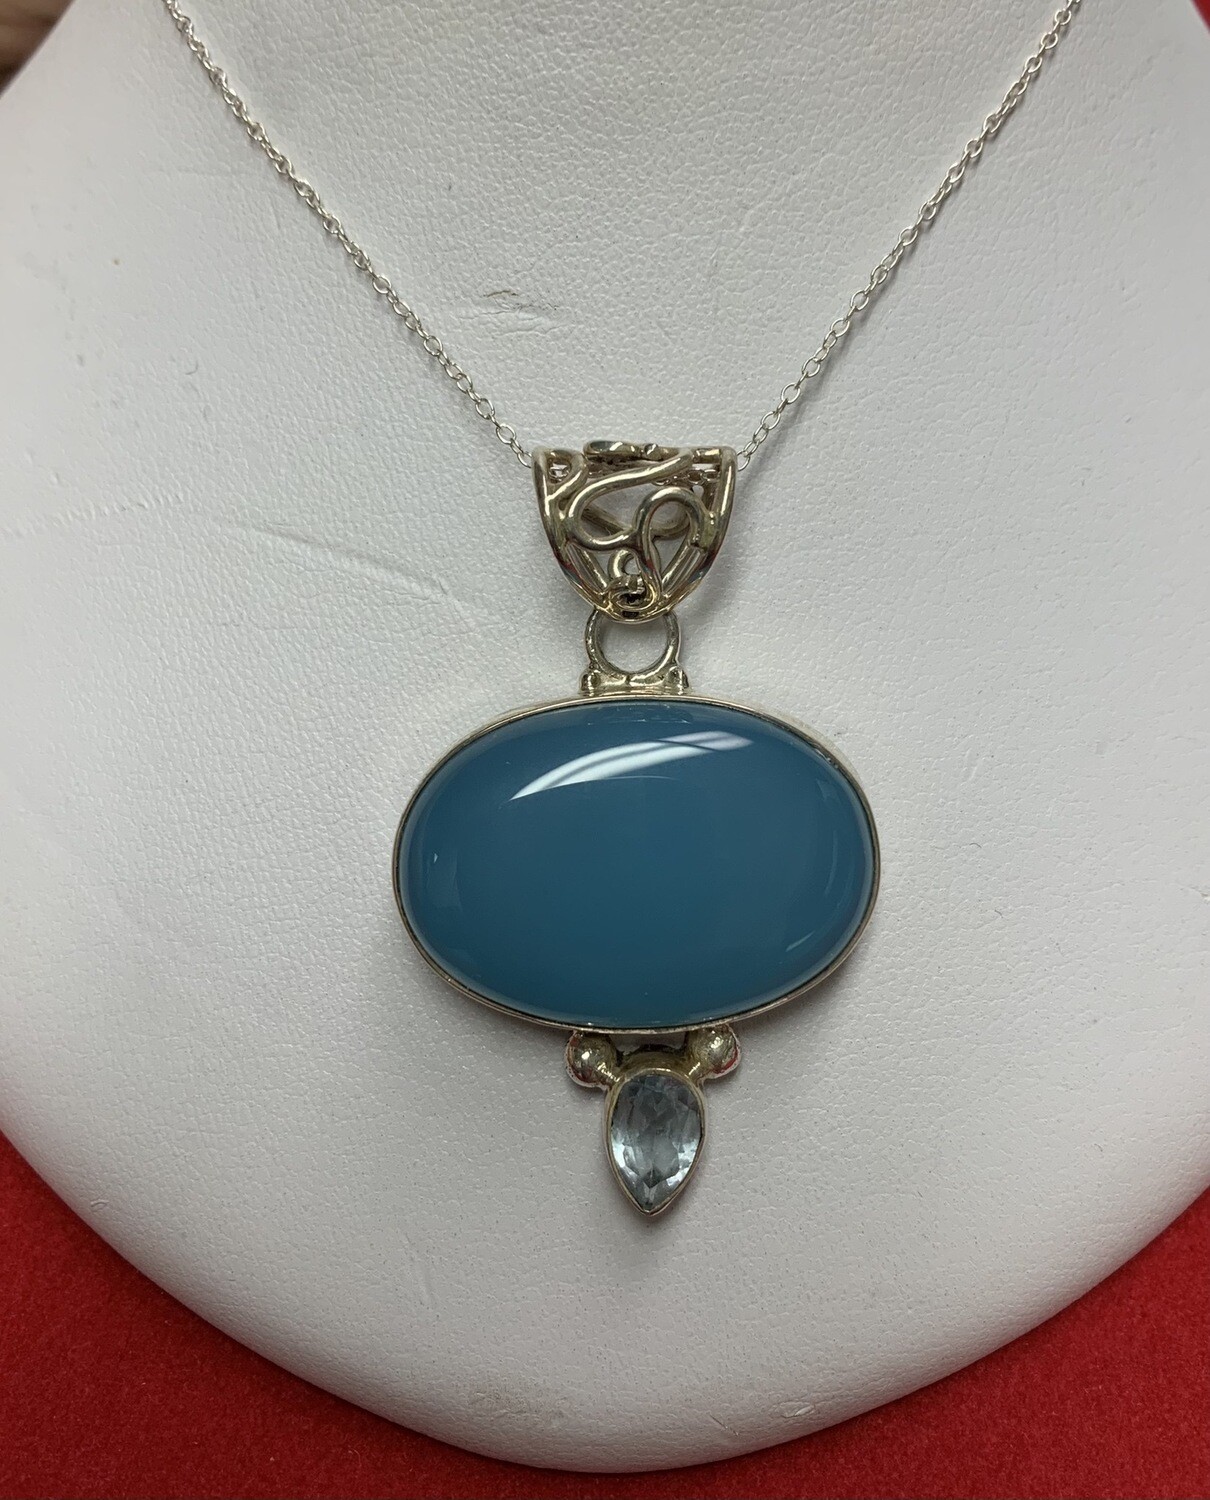 Dreamy Blue Agate Sterling Silver Pendant With Chain Necklace